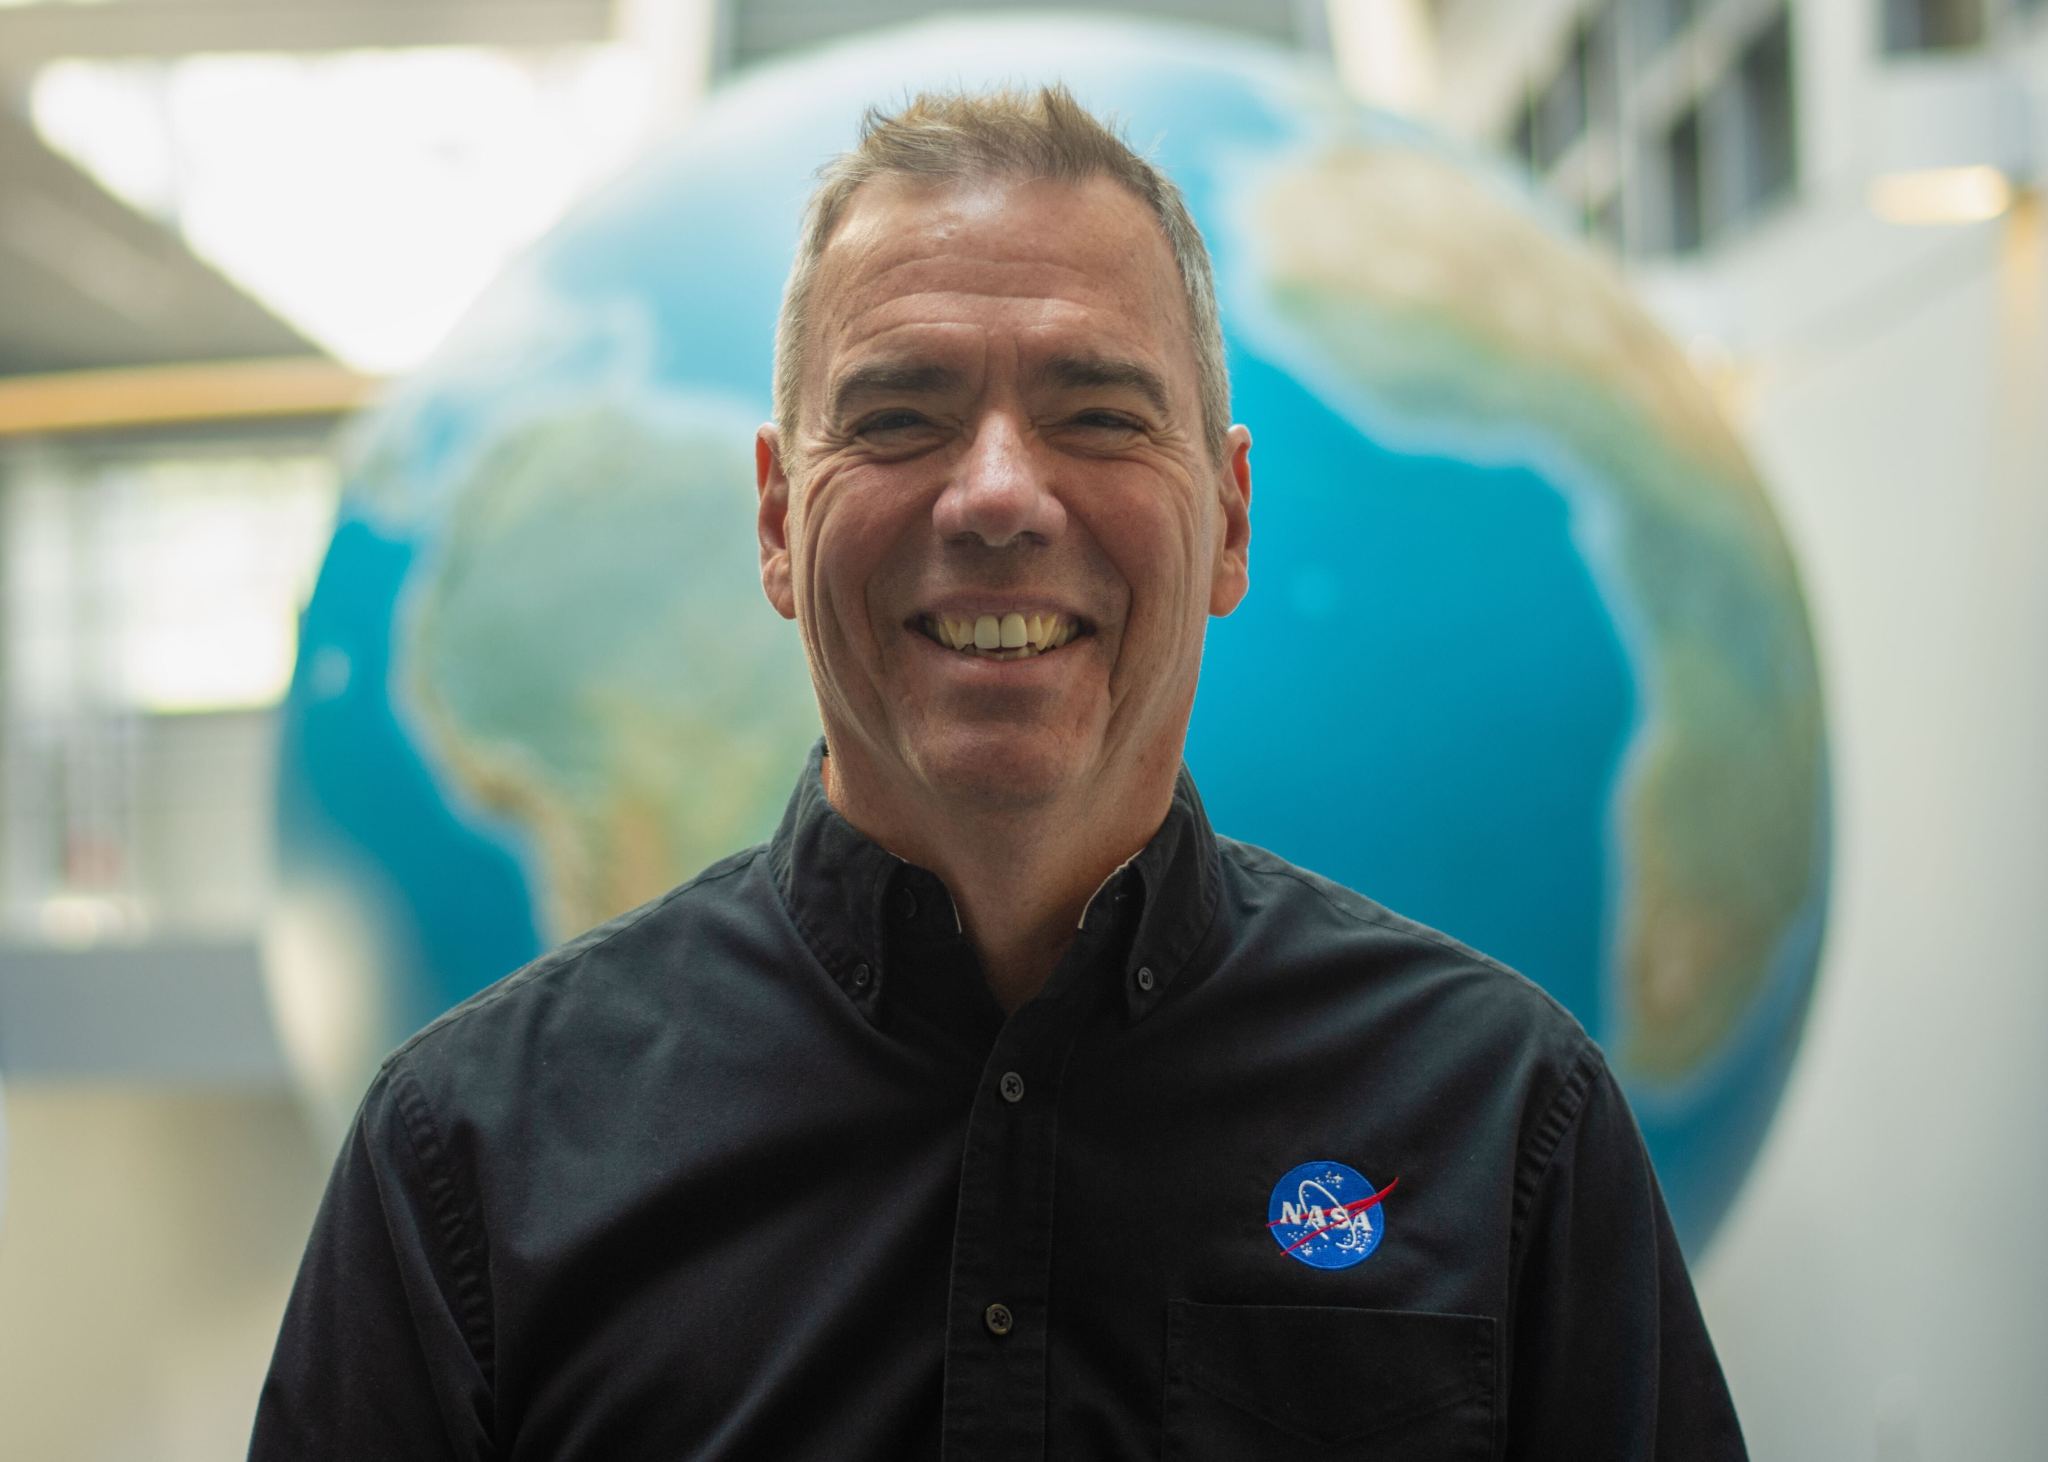 Peter Griffith, a man with short gray hair, smiles and poses for an official portrait. He wears a black collared shirt with the NASA logo on his left chest. A huge model of Earth is visible out of focus behind him in a large, sunlit room.